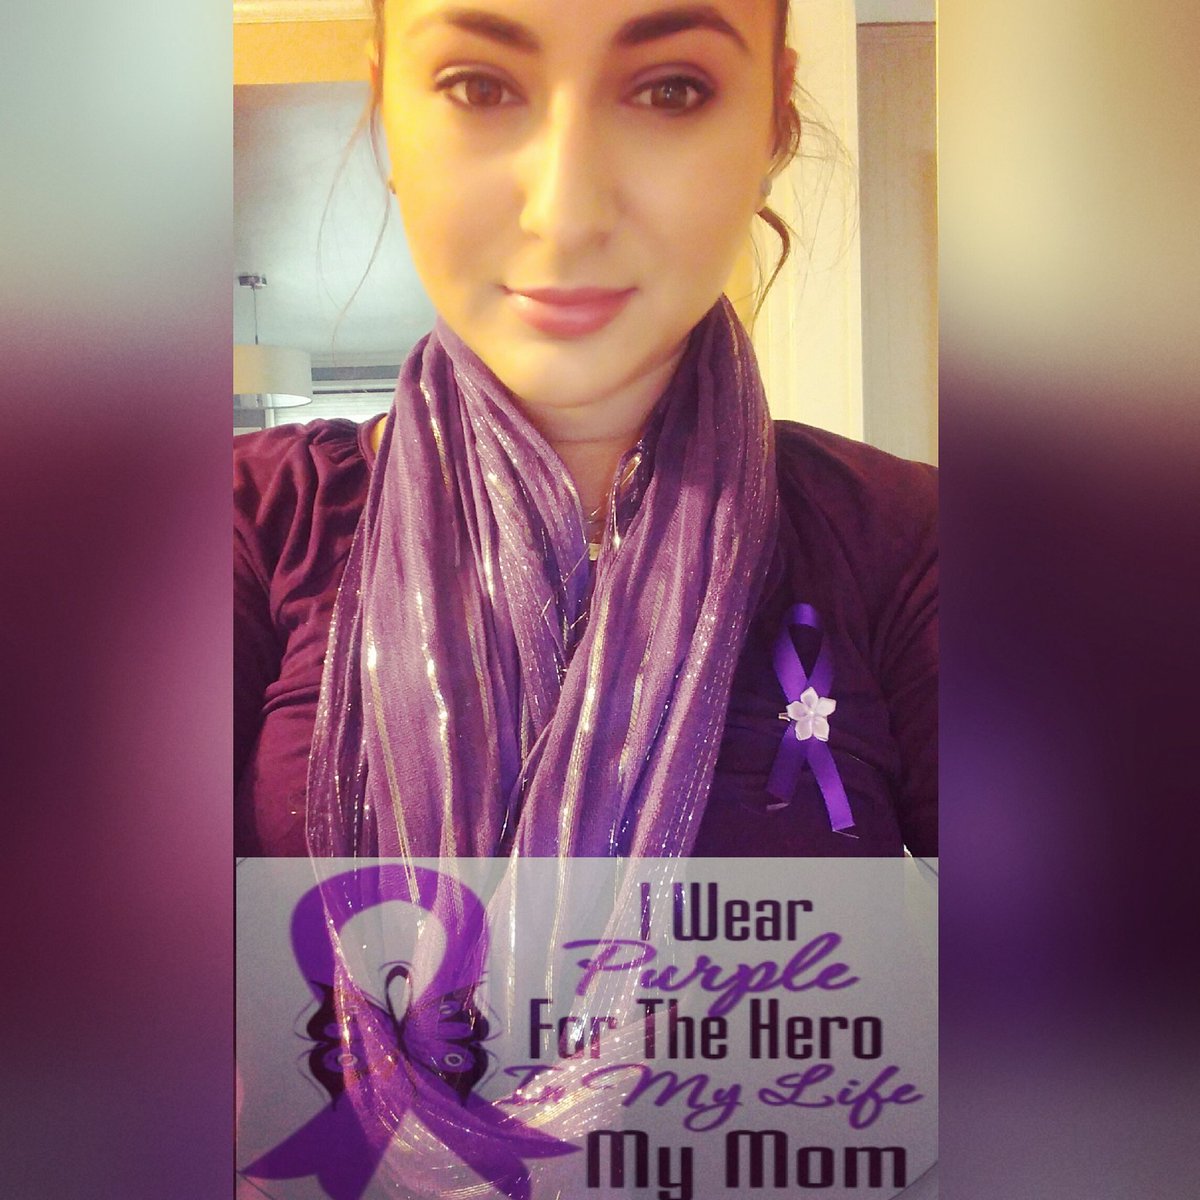 RT @CassidySandberg: @mindykaling wearing purple for my wonderful mother today 5/11/15  #wpcd #WageHope https://t.co/cIwx3cc2Oh